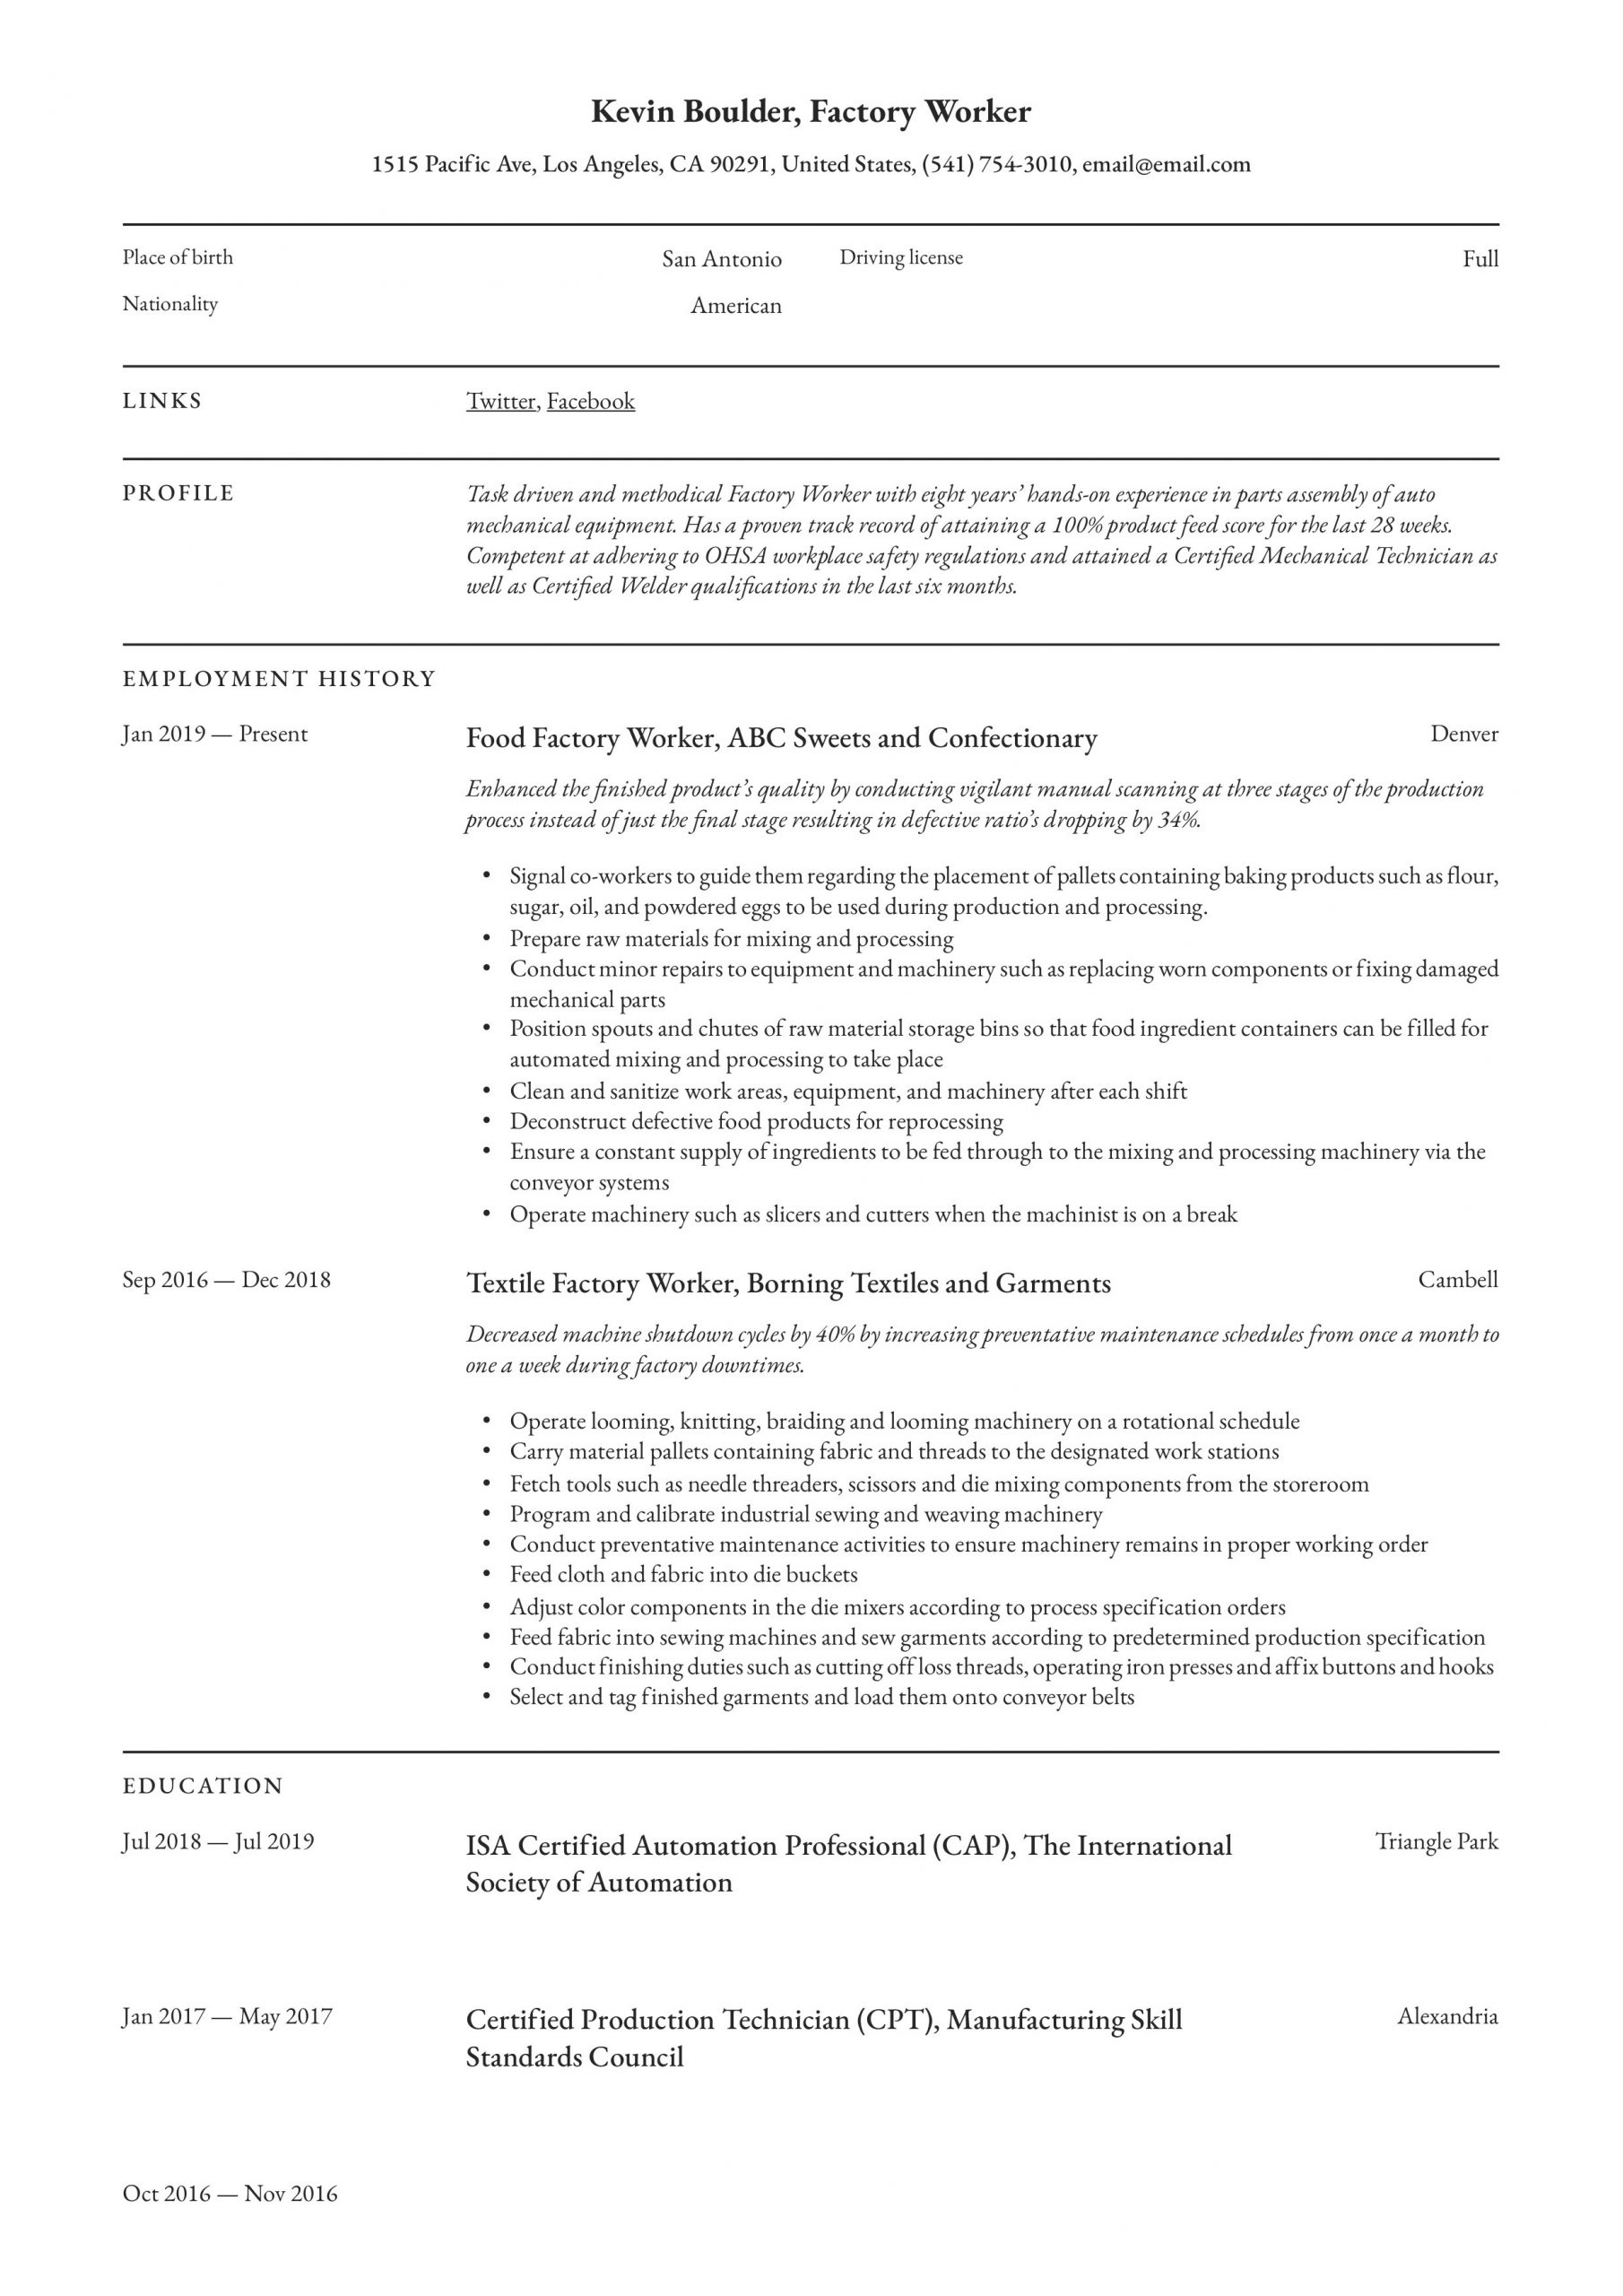 Sample Resume Objective for Production Worker Factory Worker Resume & Writing Guide  12 Resume Examples 2020